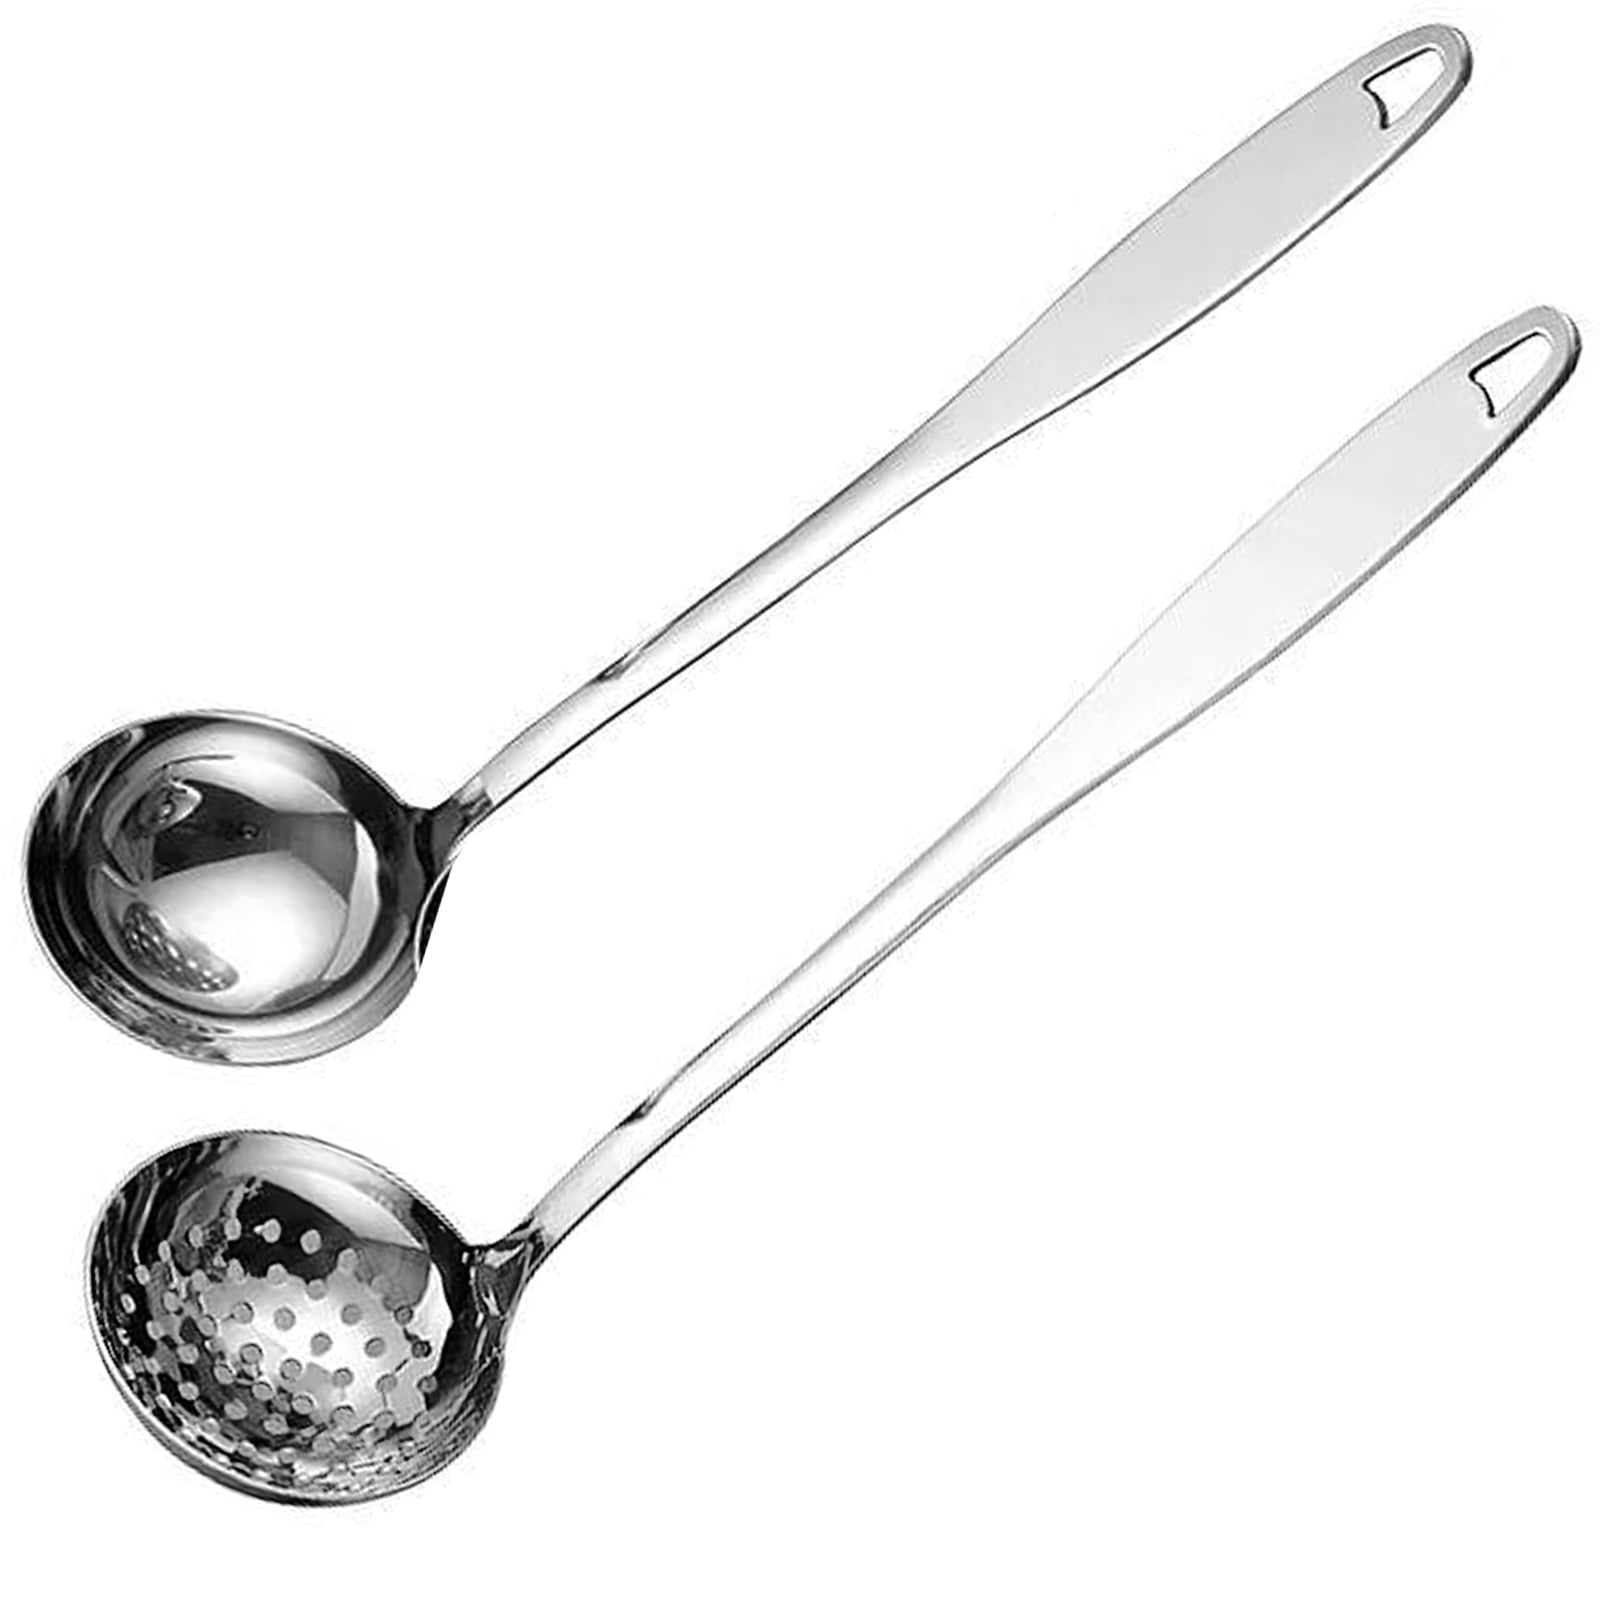  Spoon Soup Ladle, Stainless Steel Ladle Spoon Set for Home  Kitchen or Restaurant, Set of 2 - Ladle/Ladle Strainer Modern Cooking and  Serving Kitchen Utensils Coffee Spoon: Home & Kitchen